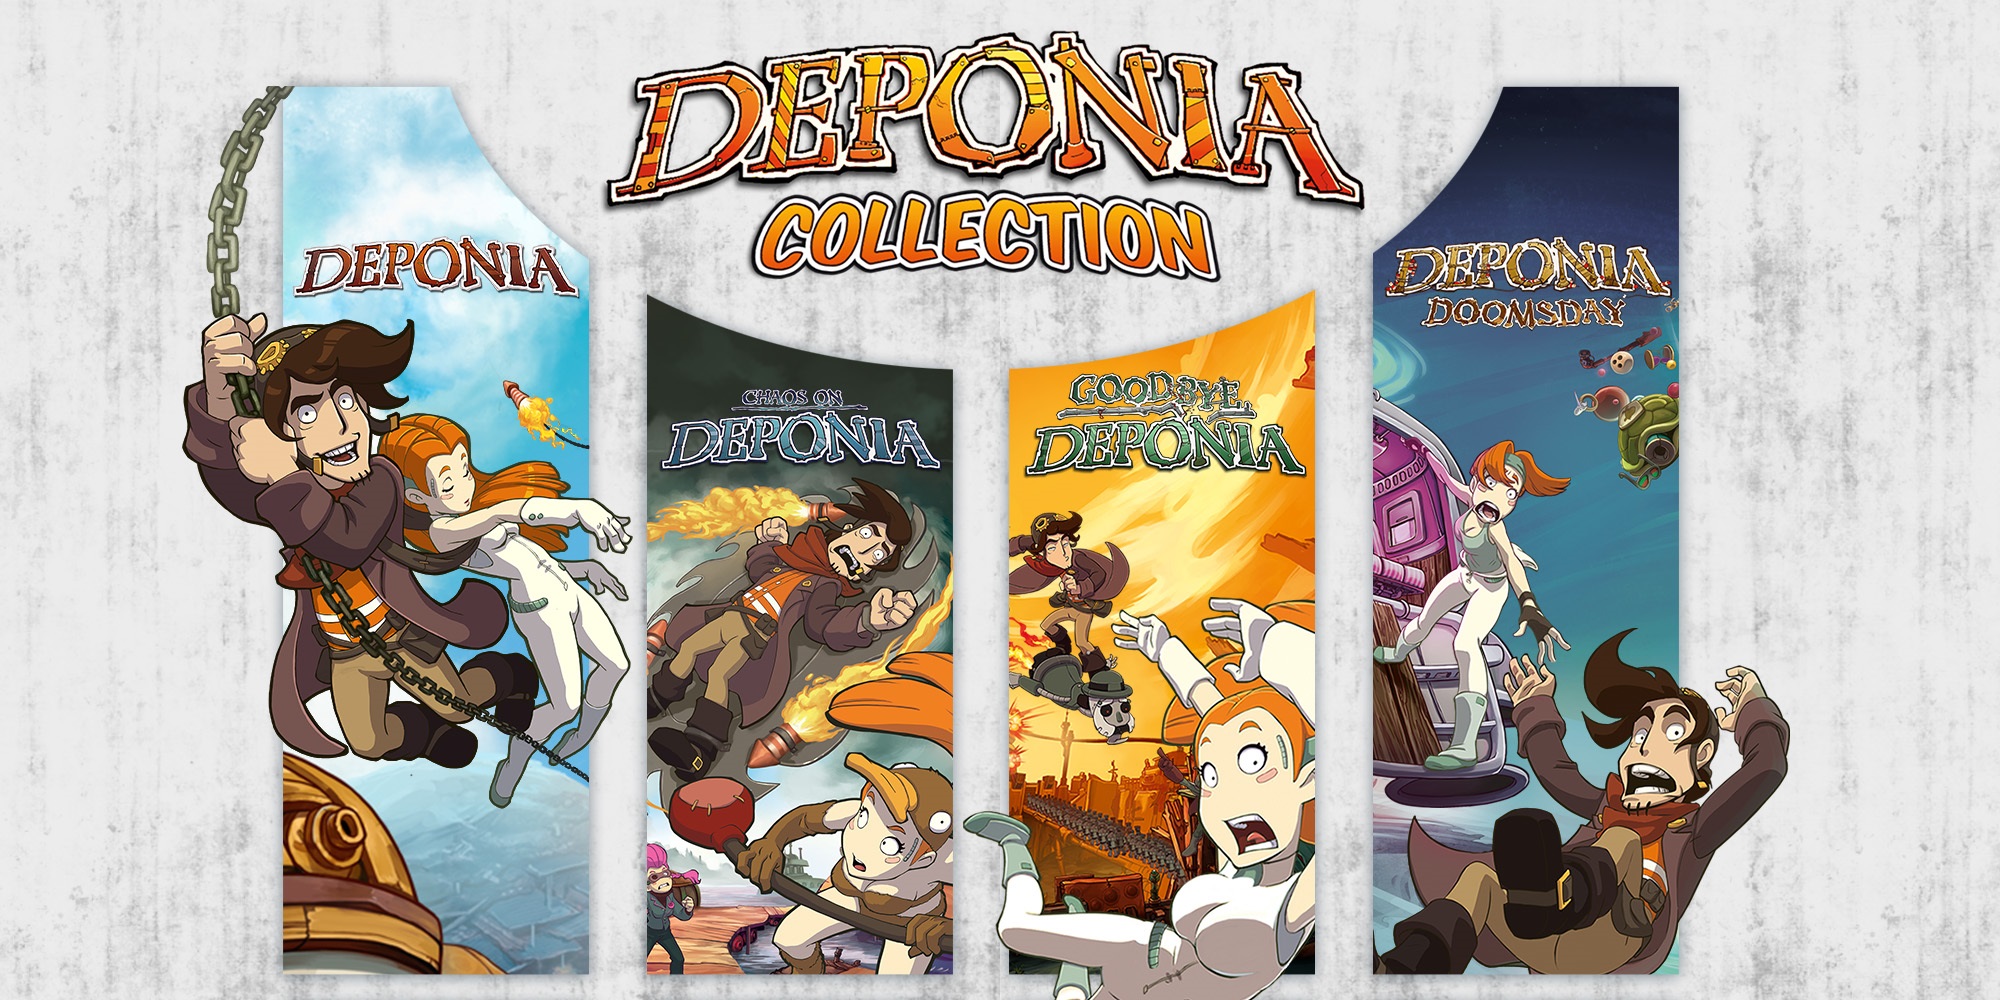 Deponia Full Scrap Collection Steam CD Key 7.9 $